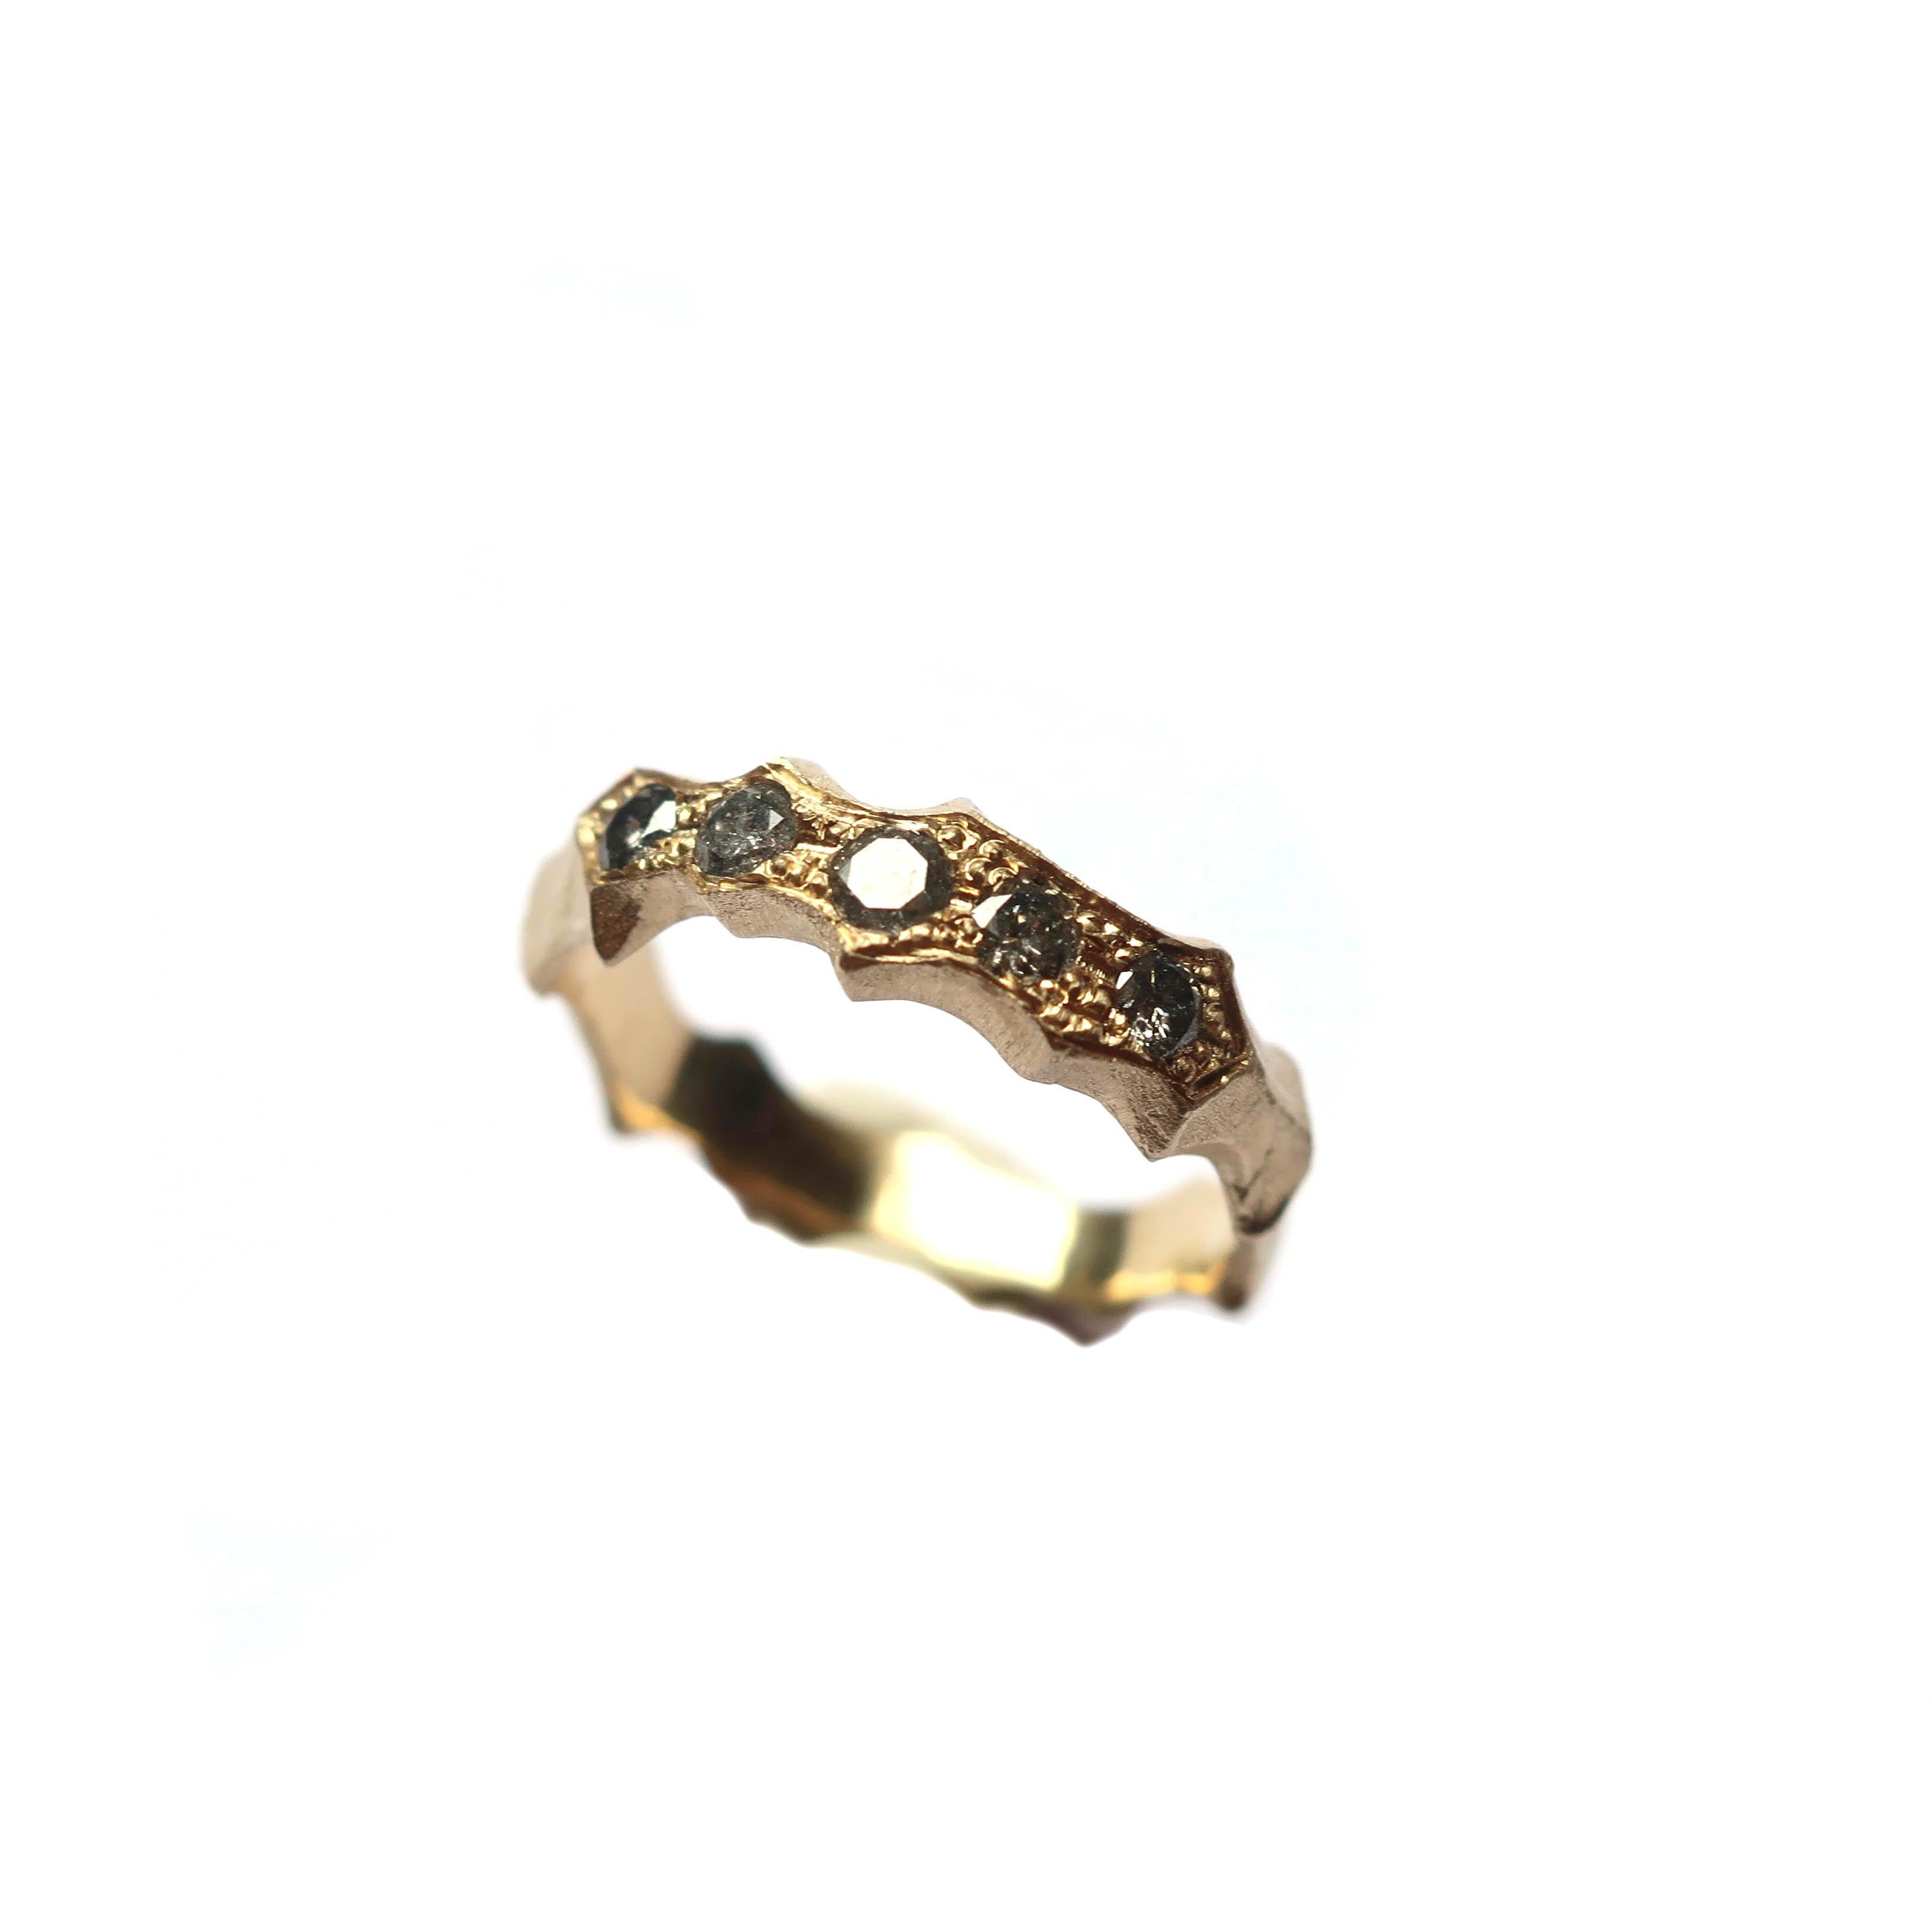 This hand carved unisex ring has 5 bead set salt and pepper diamonds in 14k gold. The band width is 3-4mm and 2.5-3mm thick. This is a wonderful alternative wedding band style. 

Instock sizes are - 8 and 6

Please message for alternative sizing,